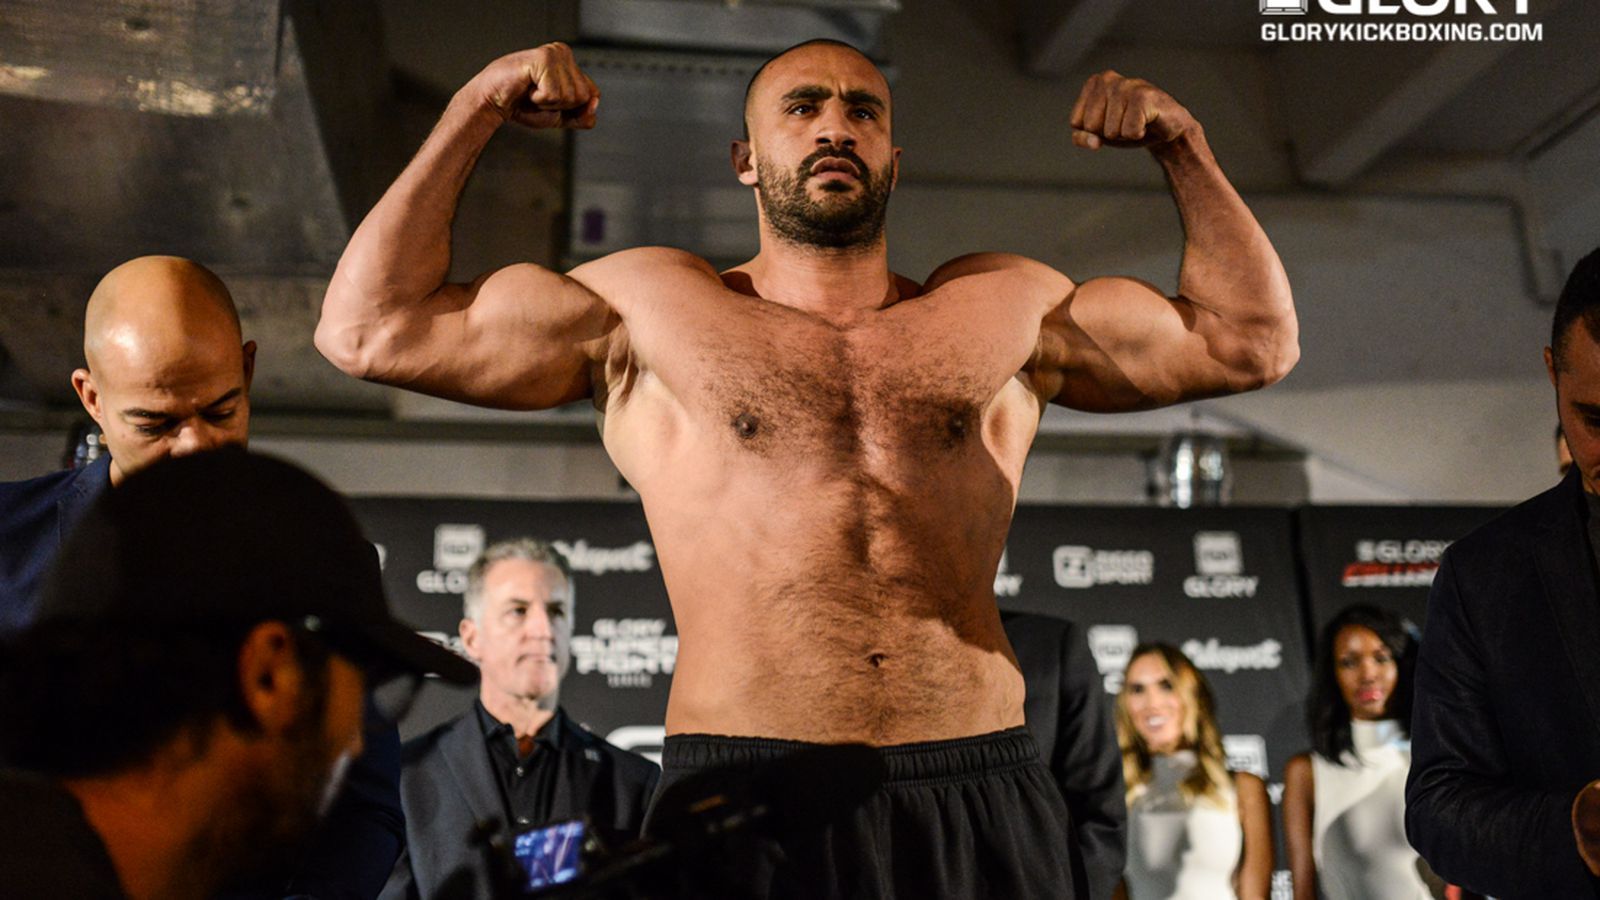 Big Mike' Passenier says Badr Hari will 'whip Verhoeven's ass' at